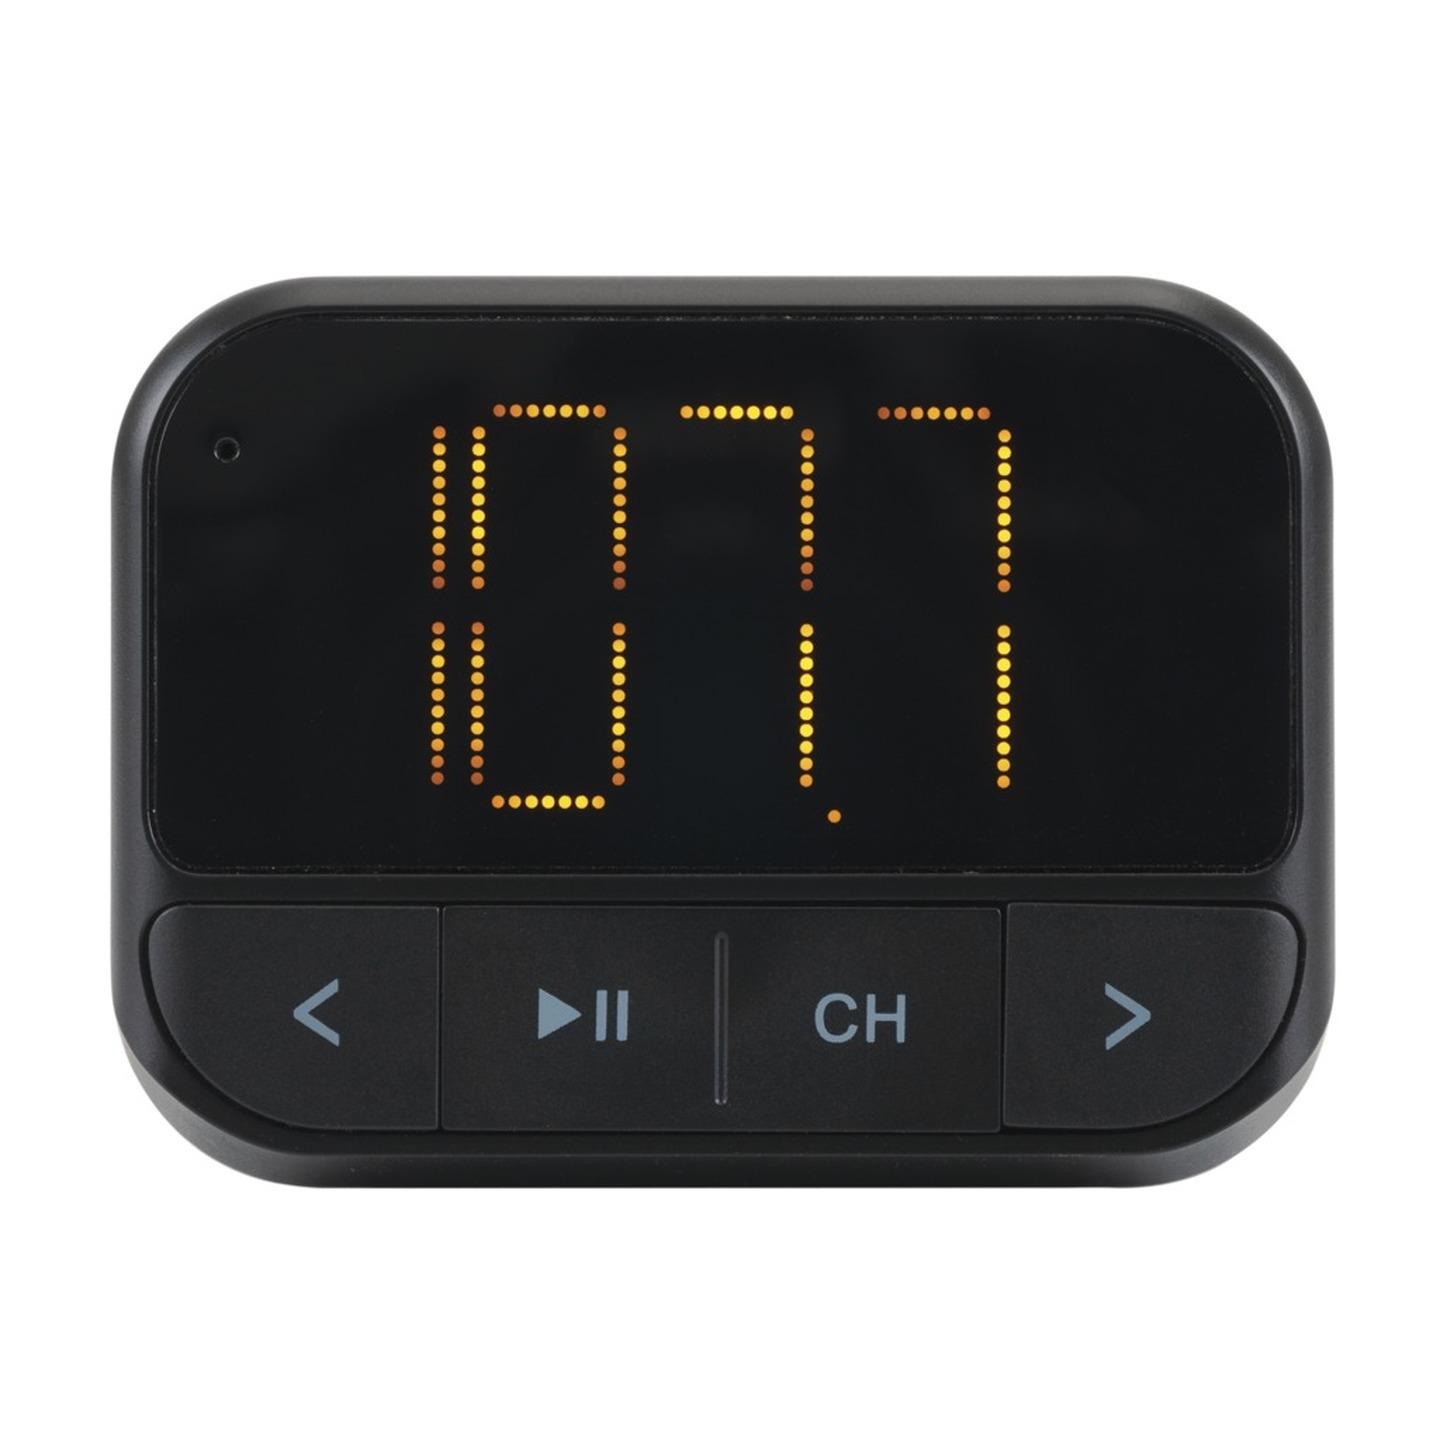 Digitech FM Transmitter with USB and Micro SD Playback